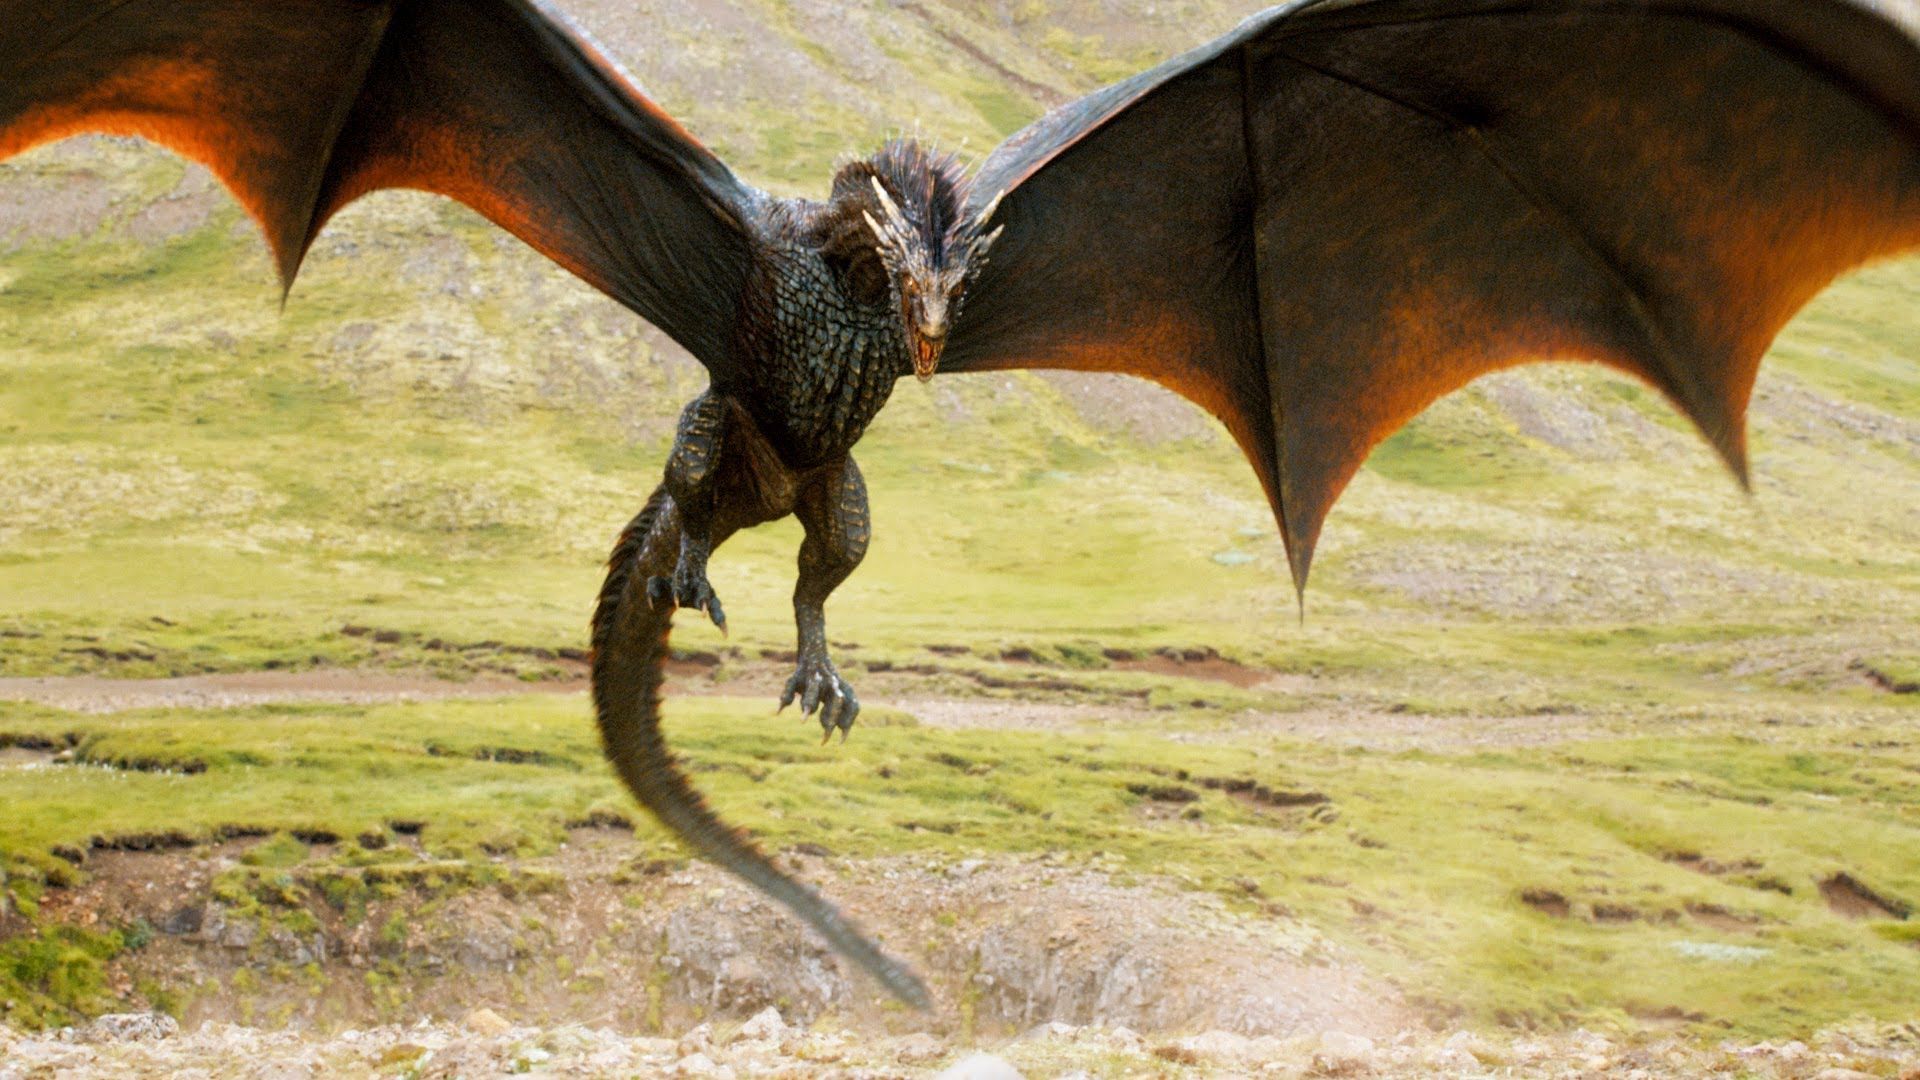 game of thrones dragons wallpaper